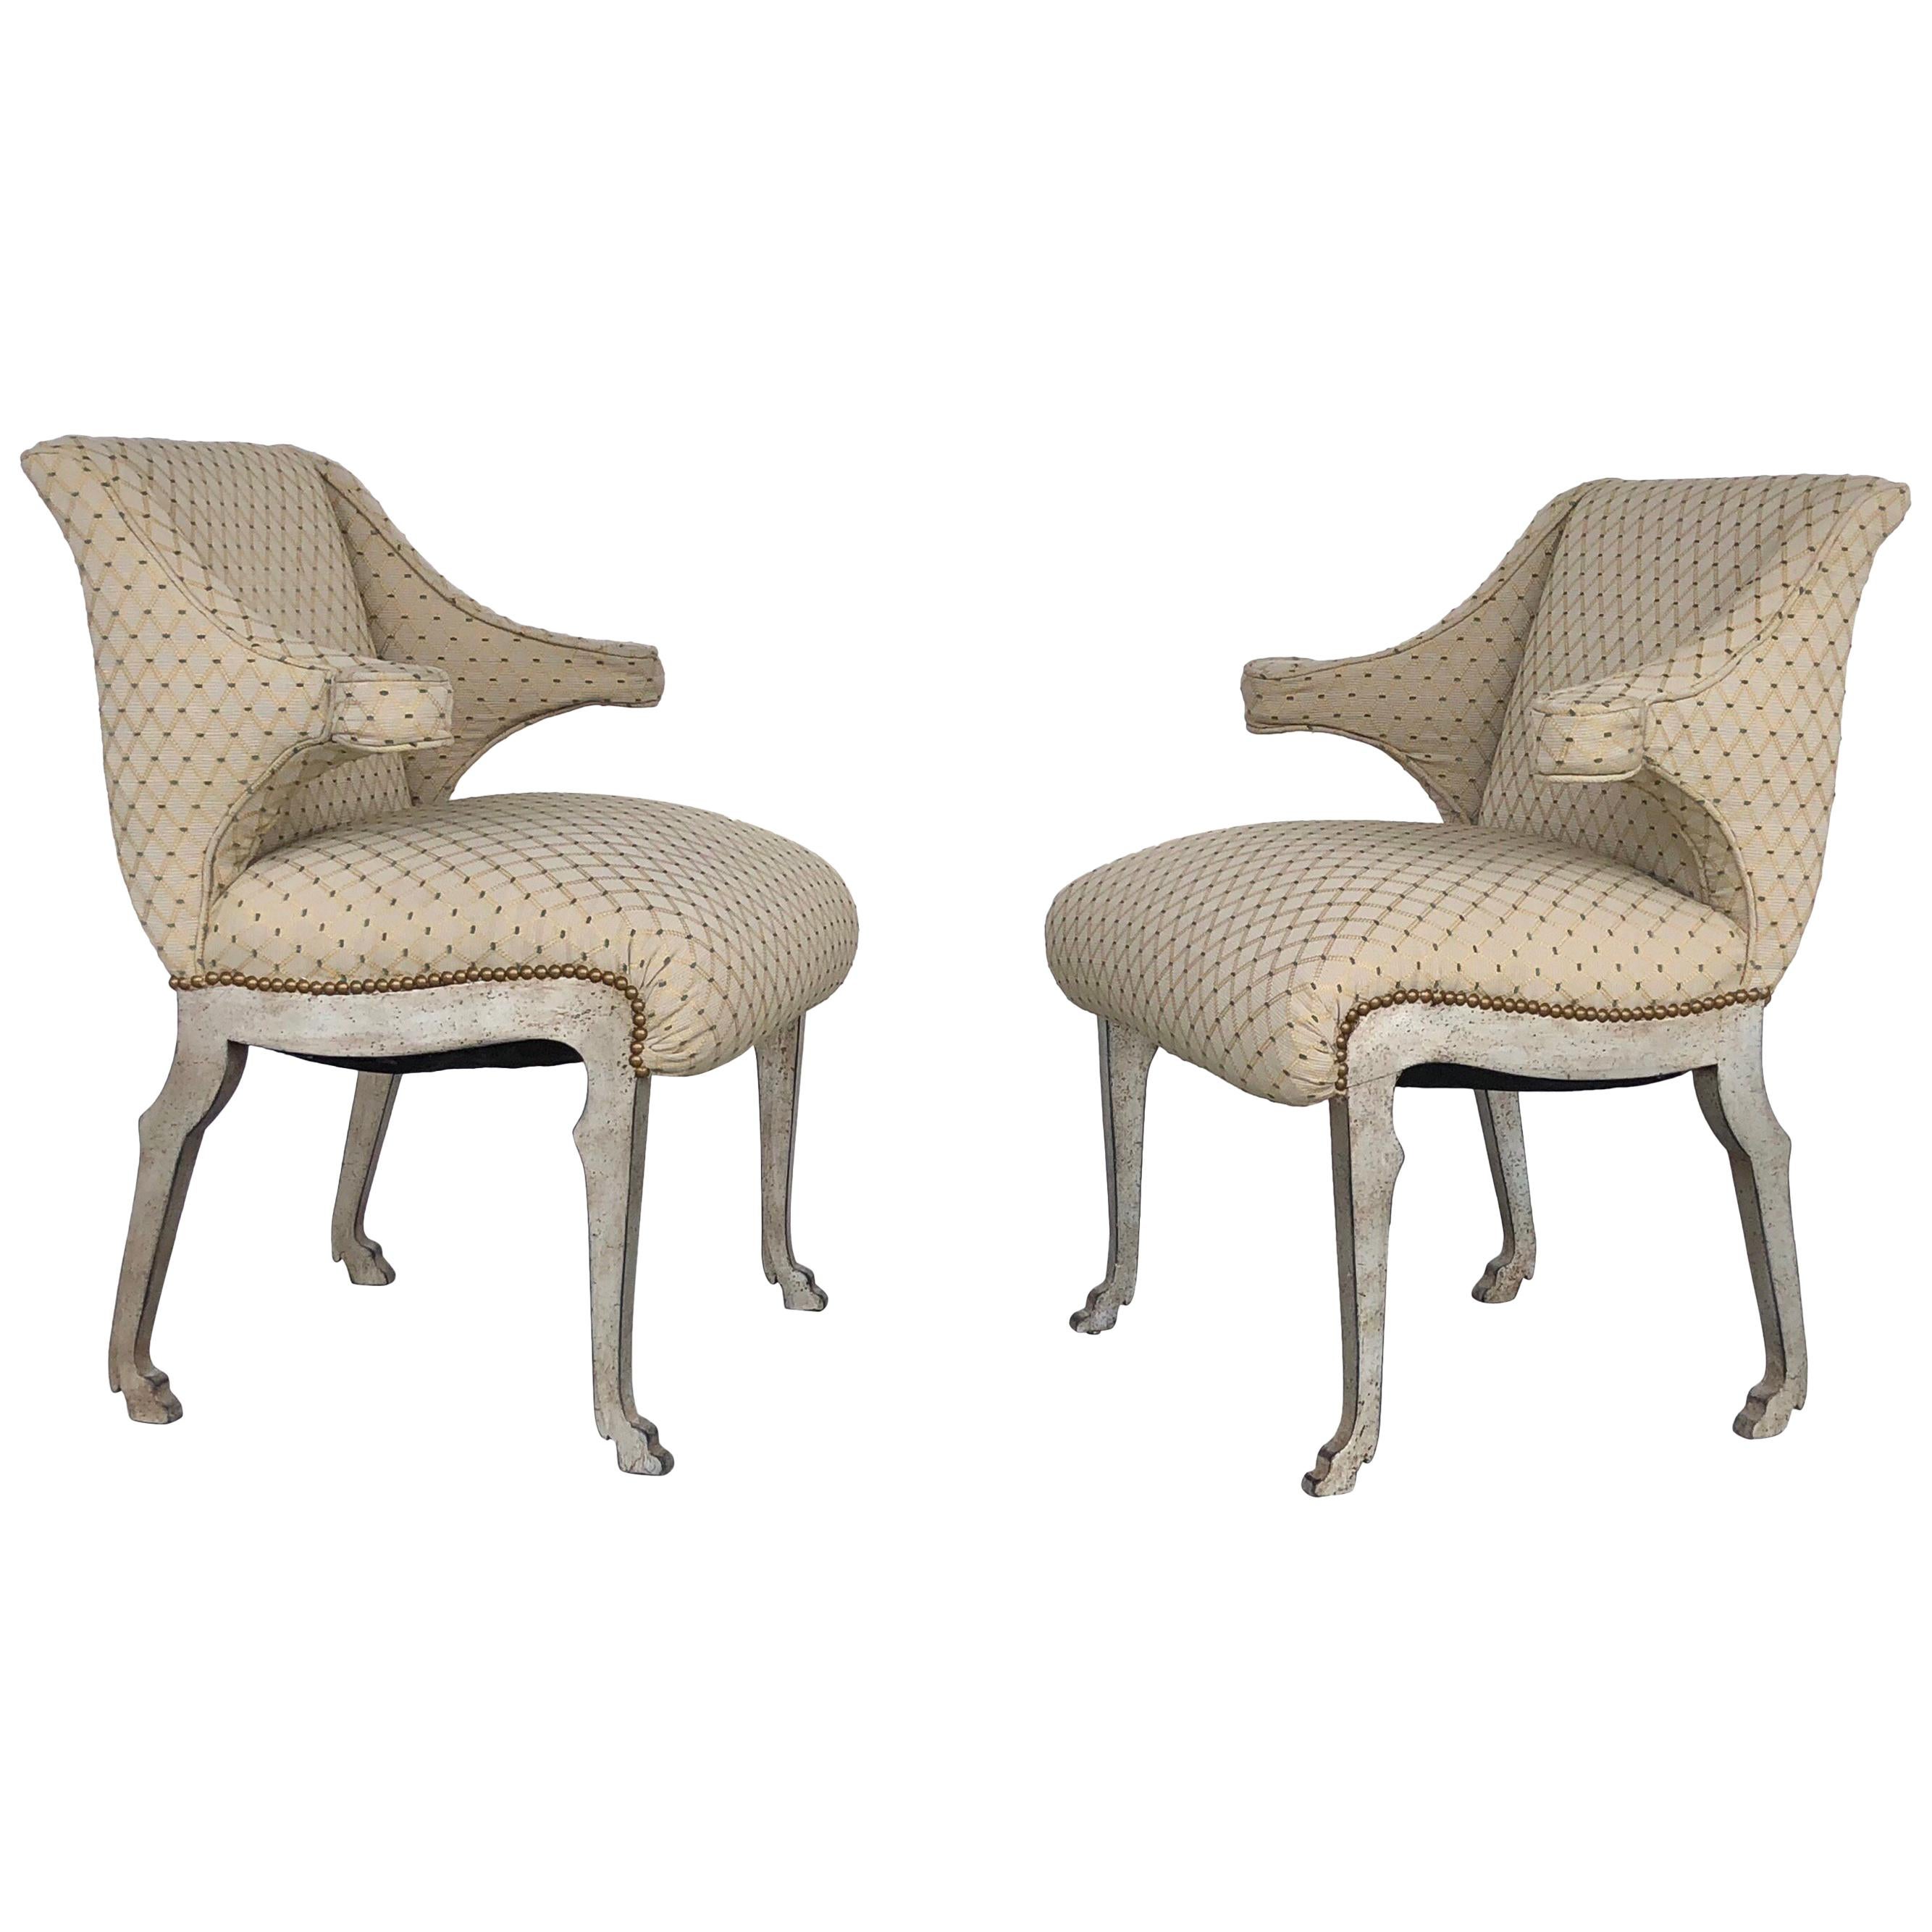 Mark Du Plantier Style Paw Feet Arm Chairs, Pair For Sale